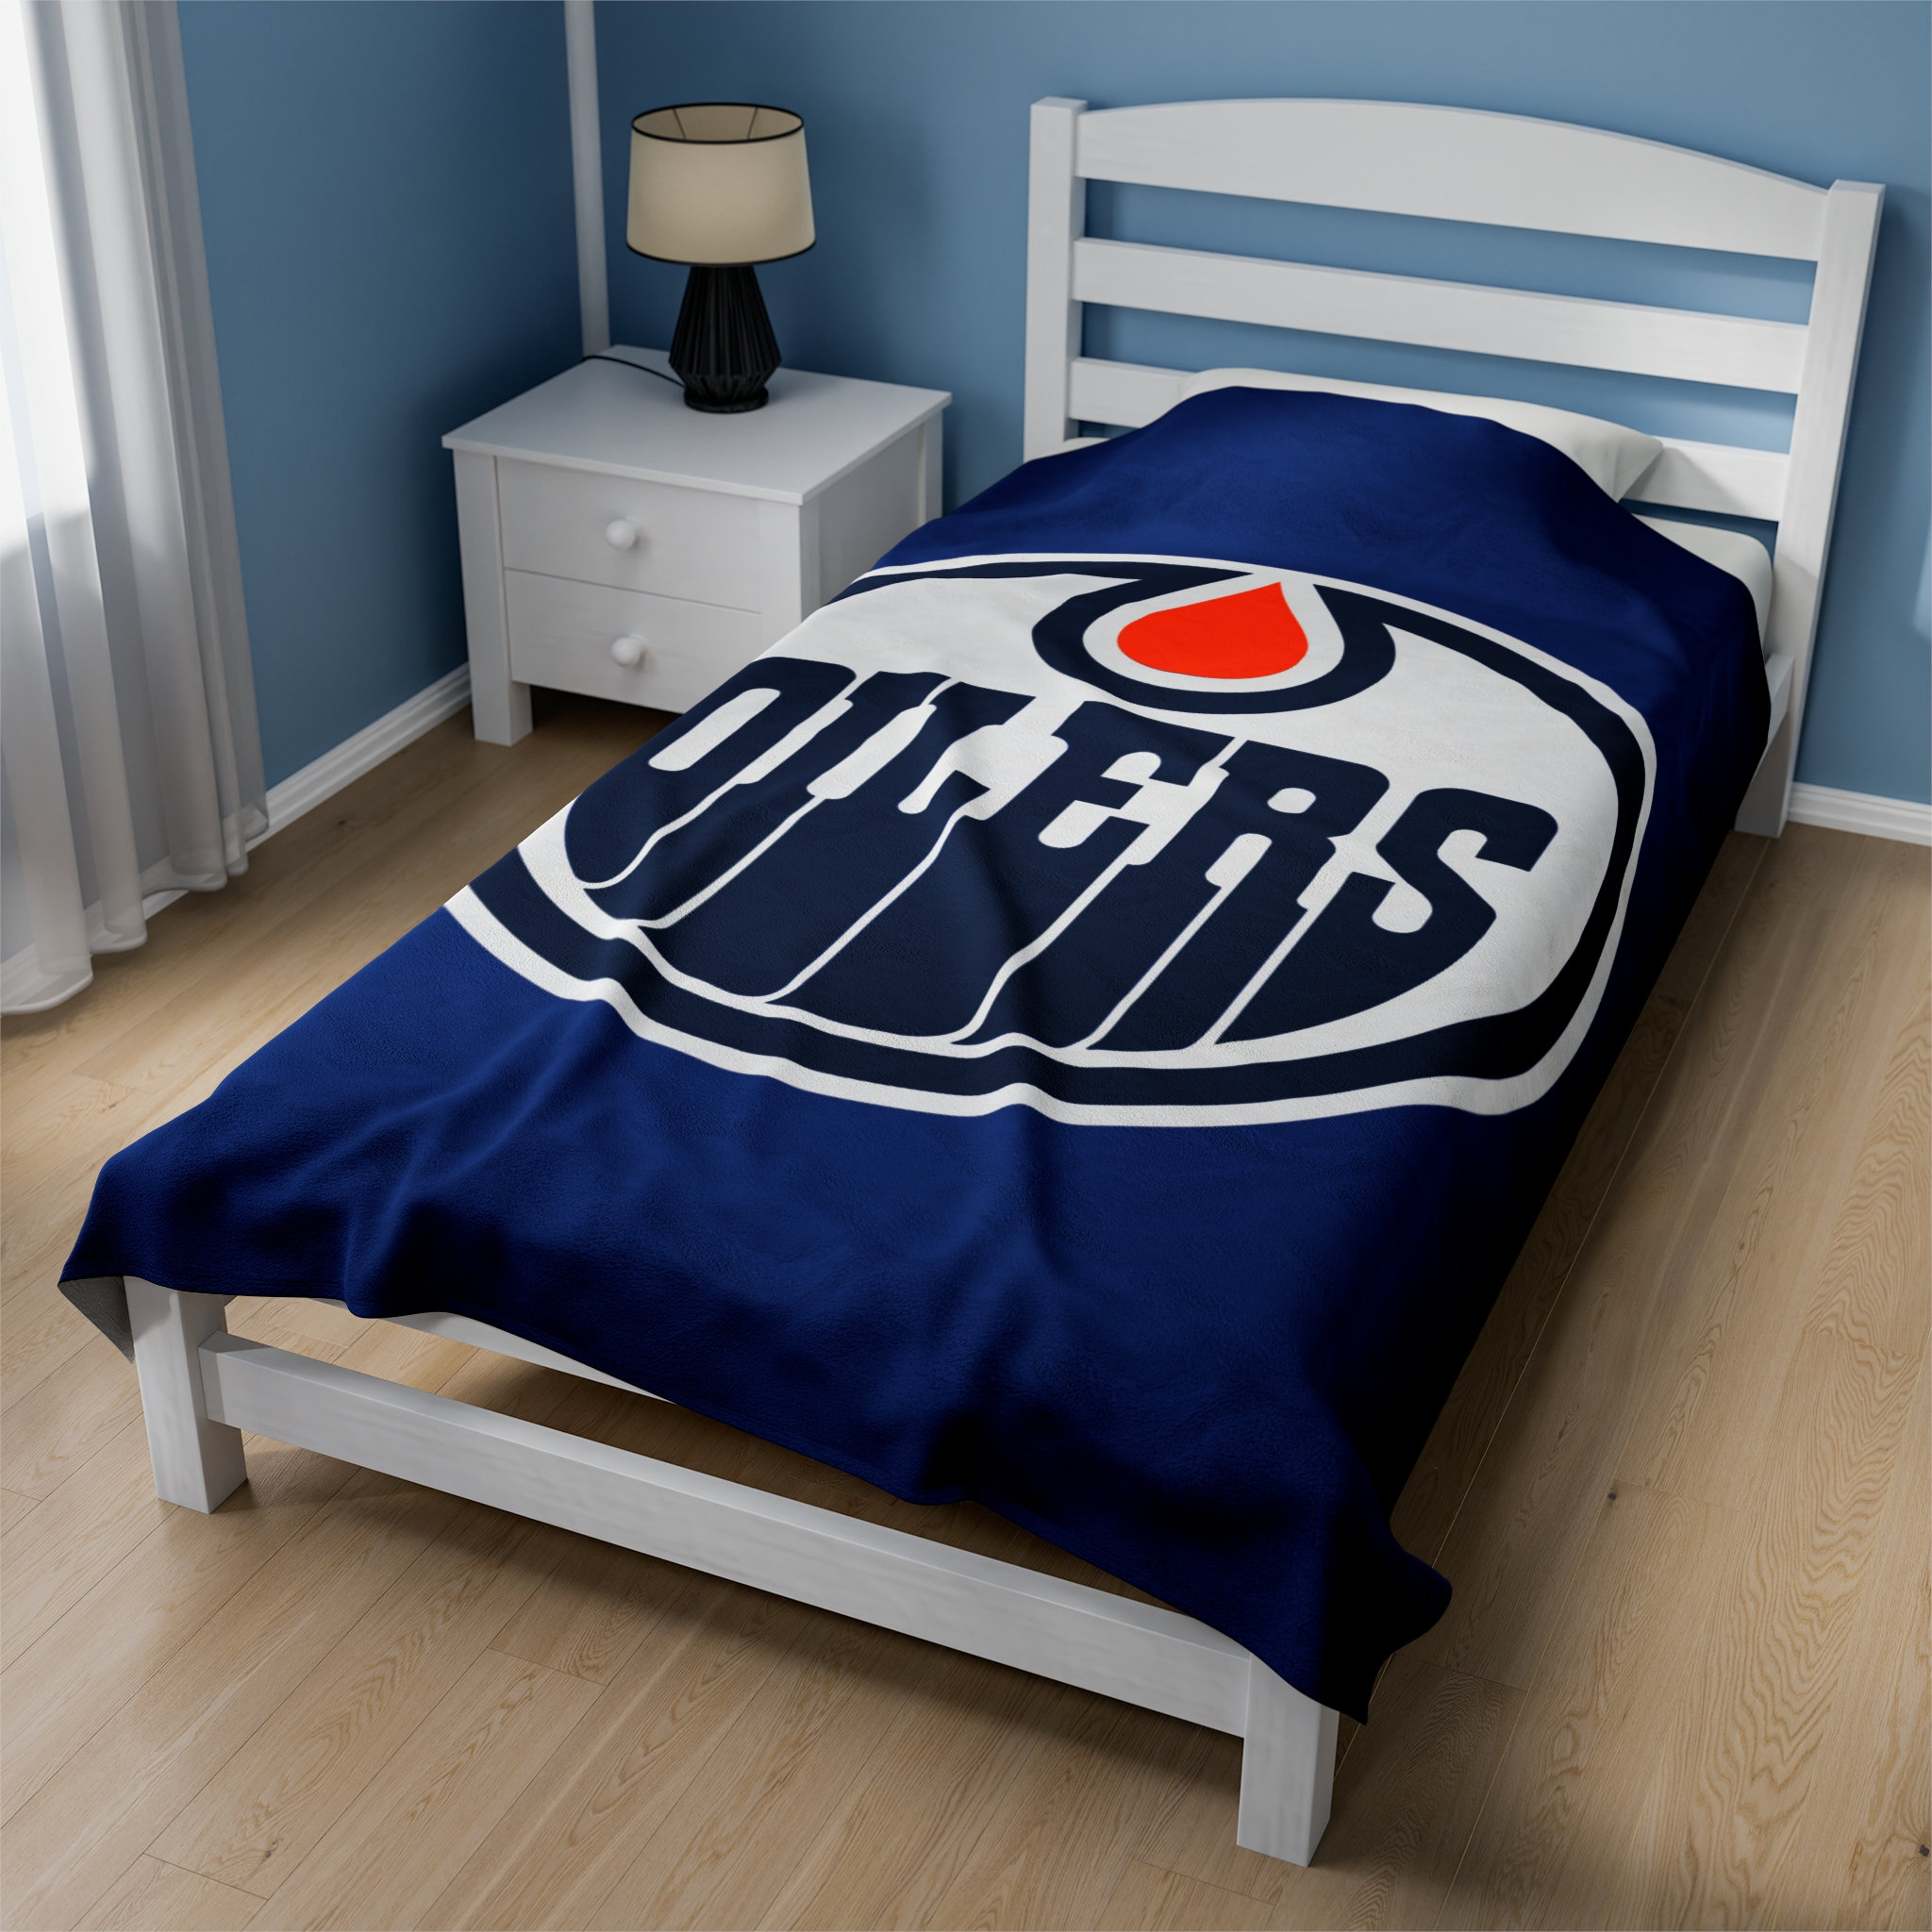 Custom Name Edmonton Oilers Shirt 3D Cool Mascot Oilers Gift Ideas -  Personalized Gifts: Family, Sports, Occasions, Trending